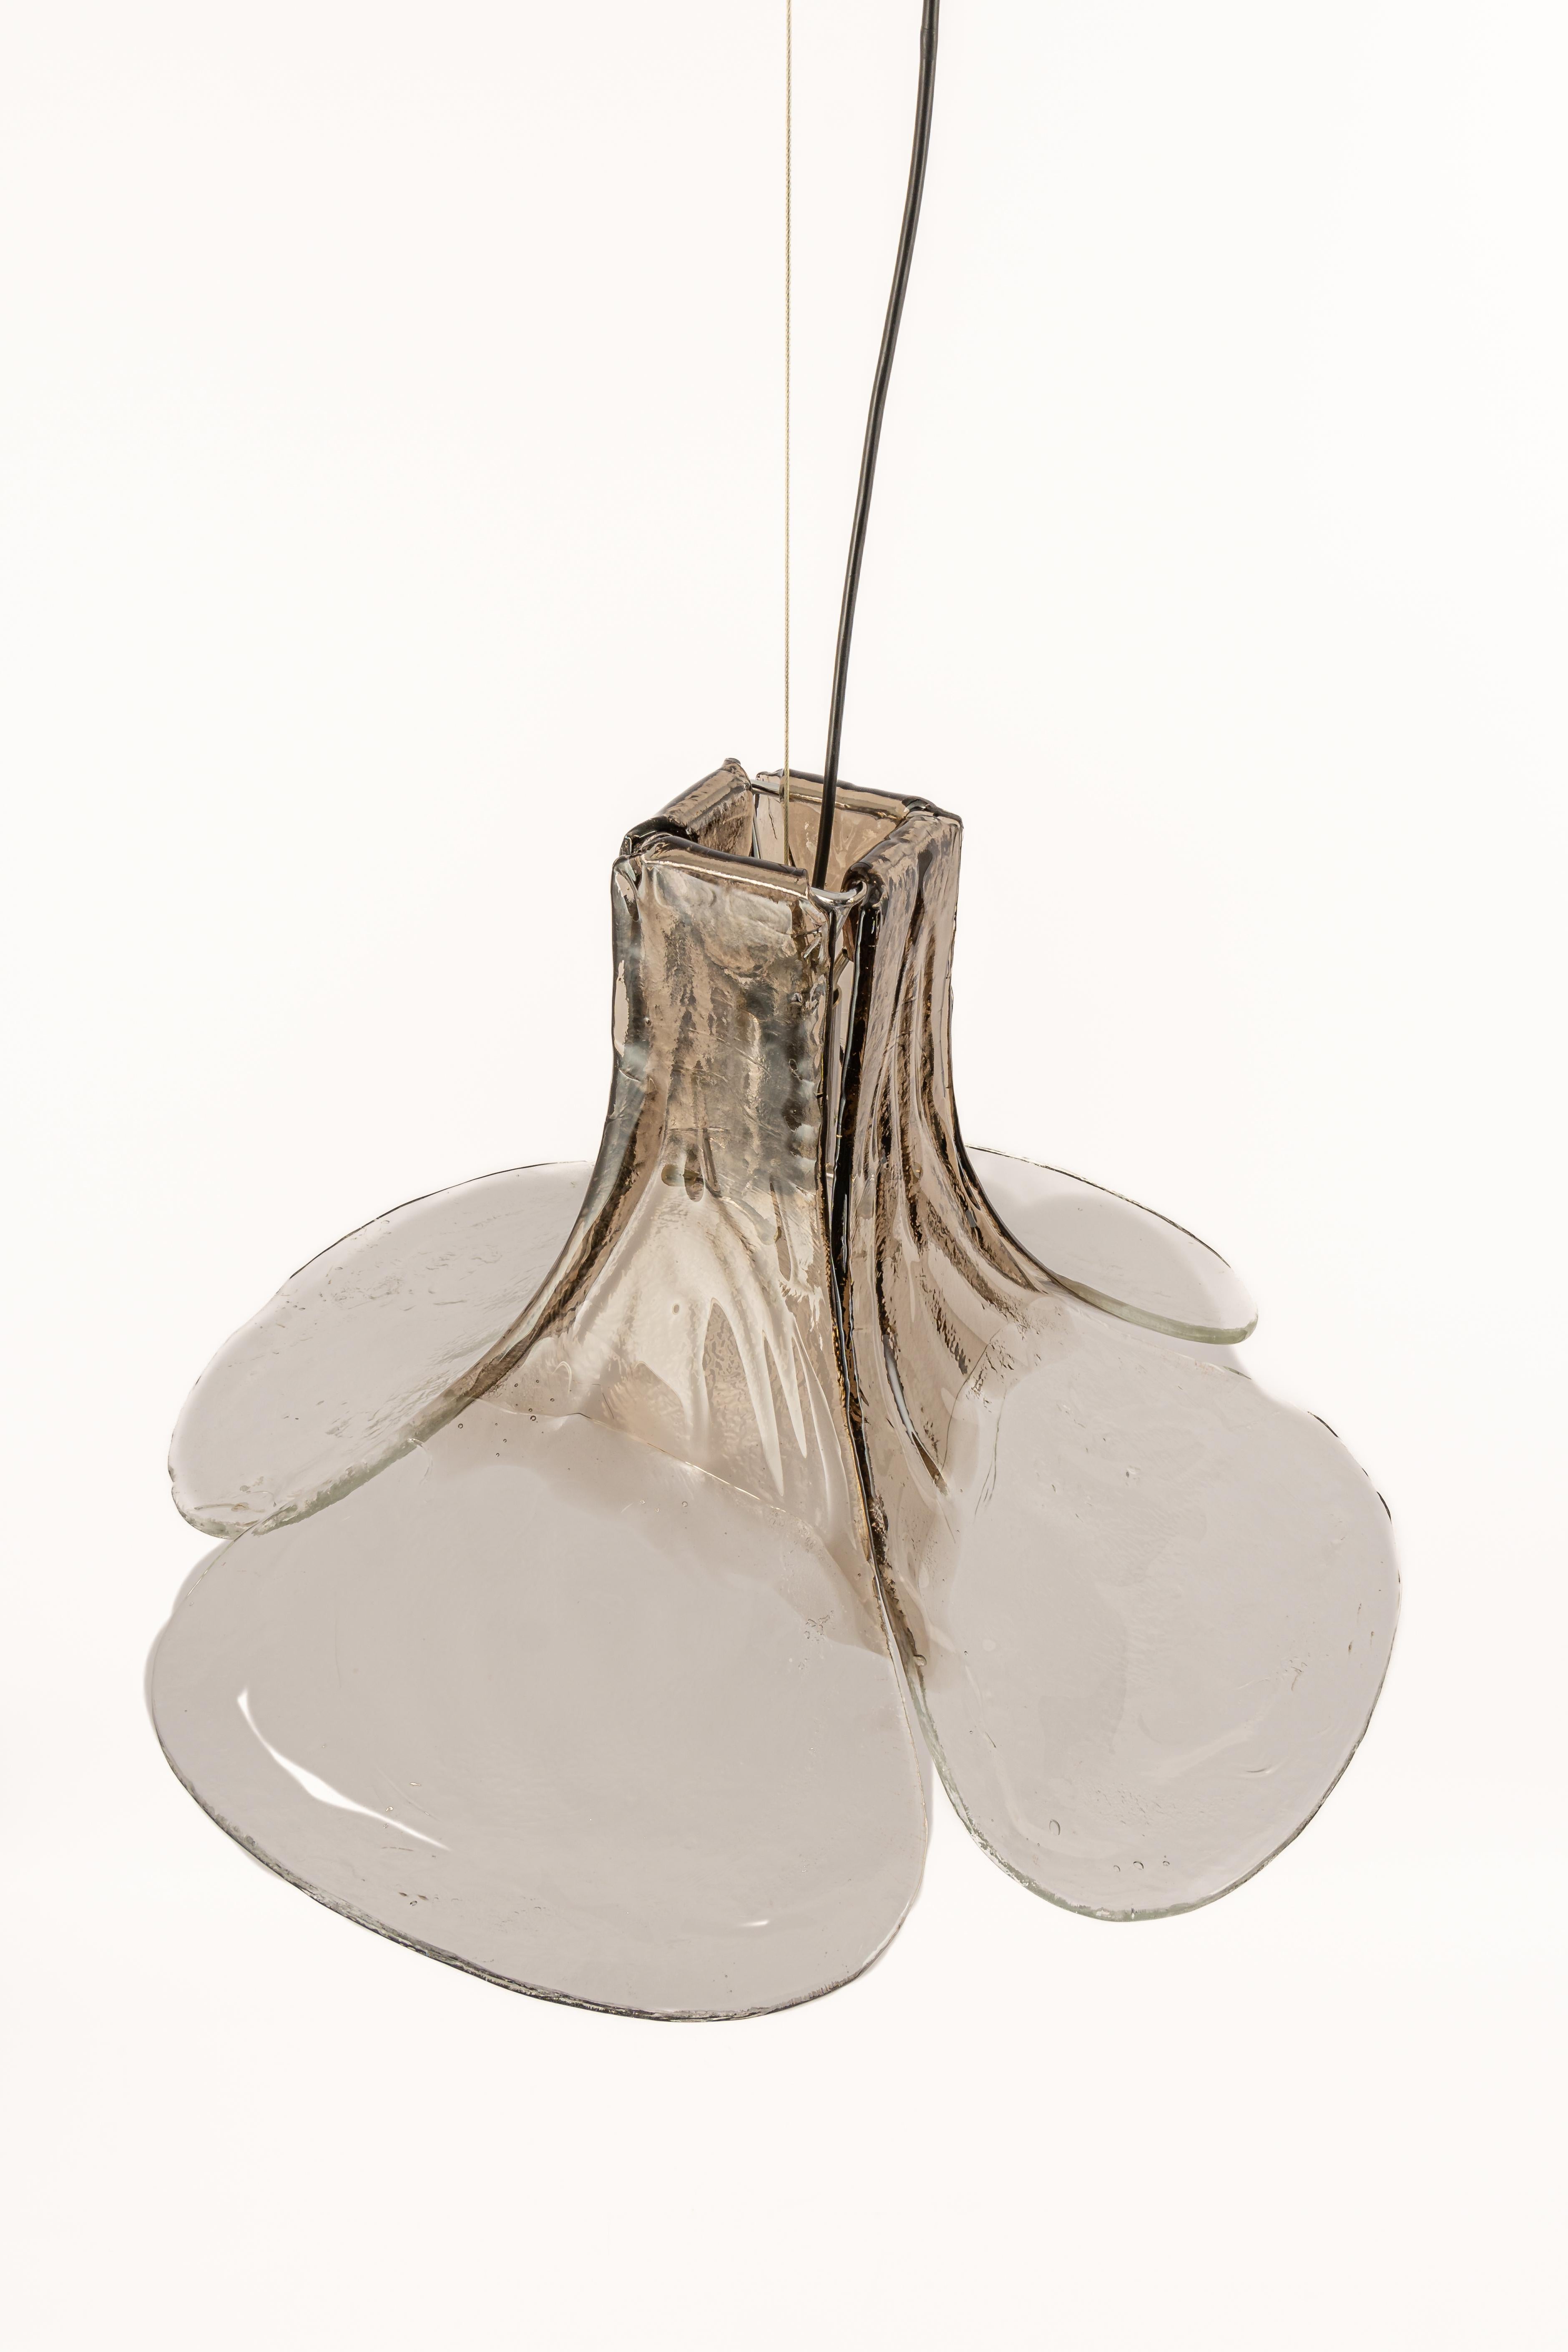 Wonderful floral pendant light with four hand-made clear and smoked Murano glass petals which are supported by a metal frame, designed by Carlo Nason for Kalmar, in the 1970s

Heavy quality and in very good condition. Cleaned, well-wired and ready